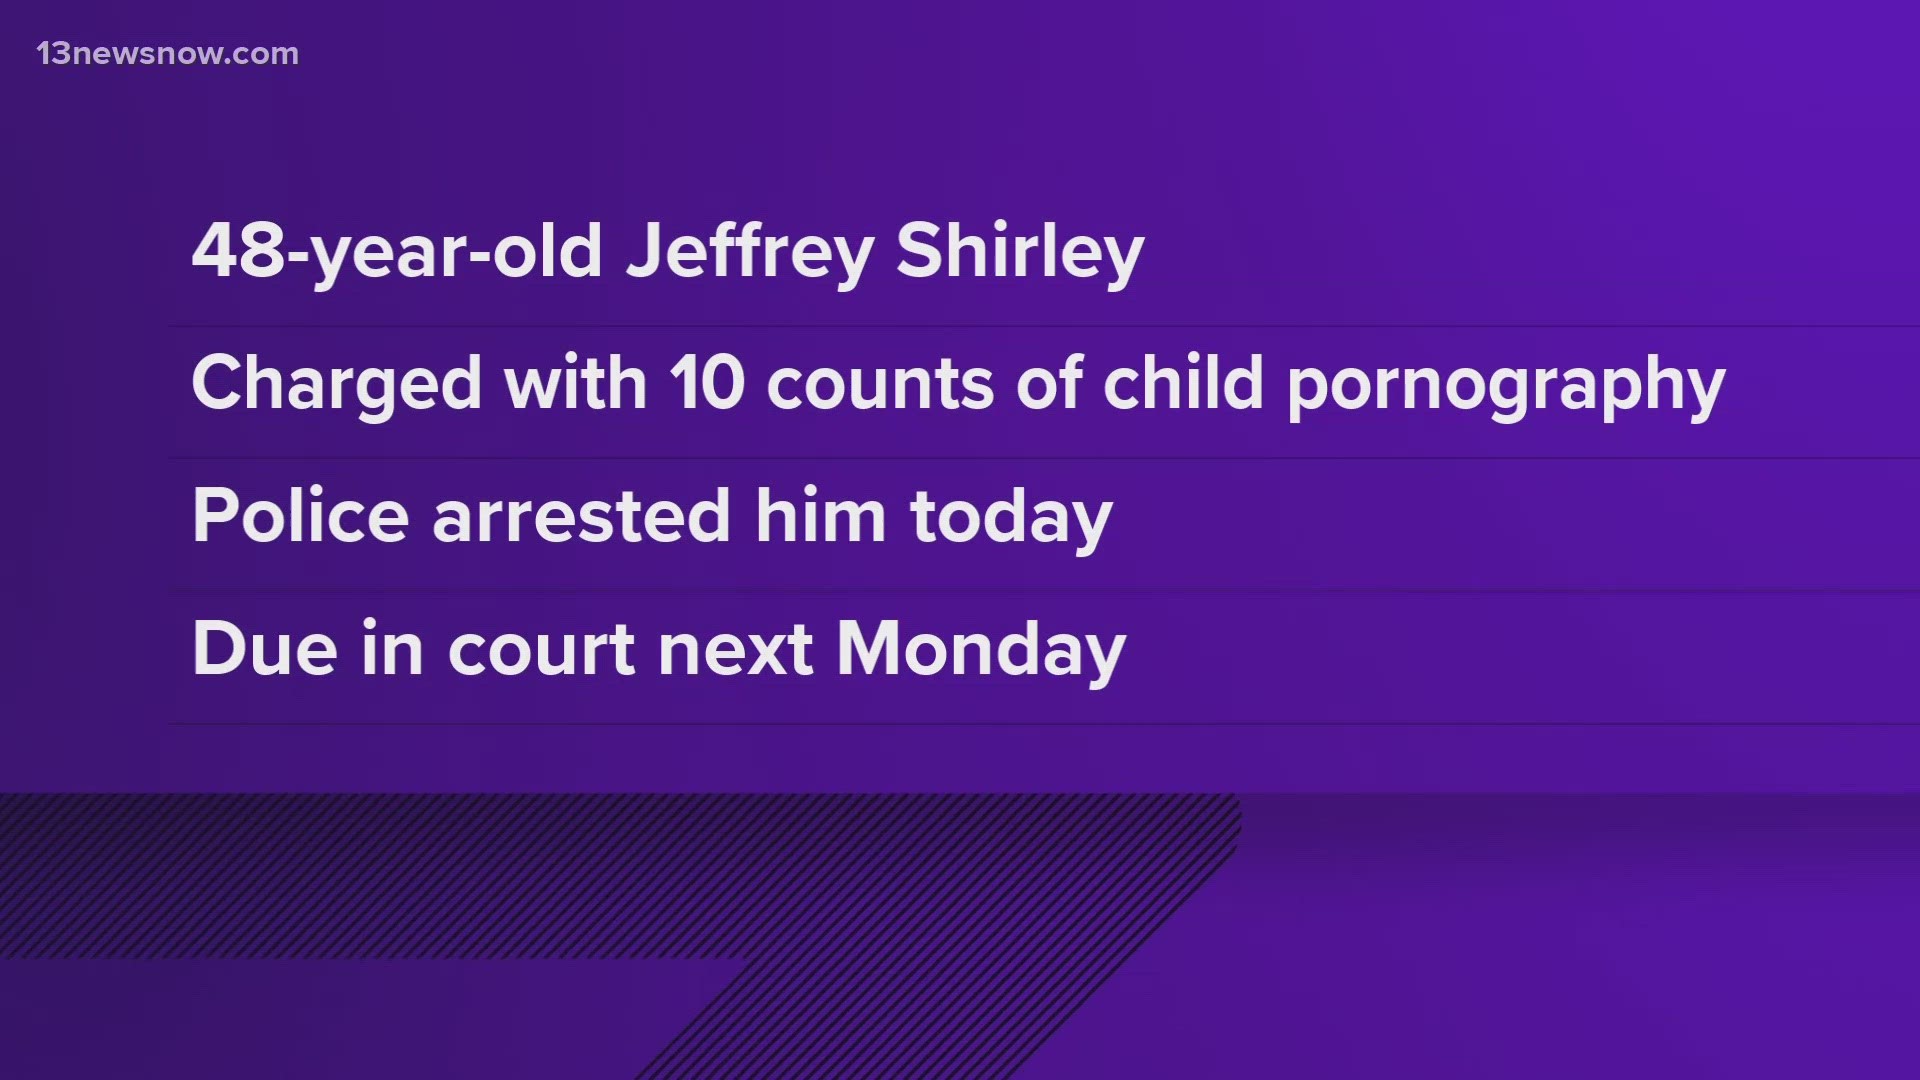 Jeffery Scott Shirley was arrested on 10 child pornography charges as a result of the investigation by Chesapeake police.